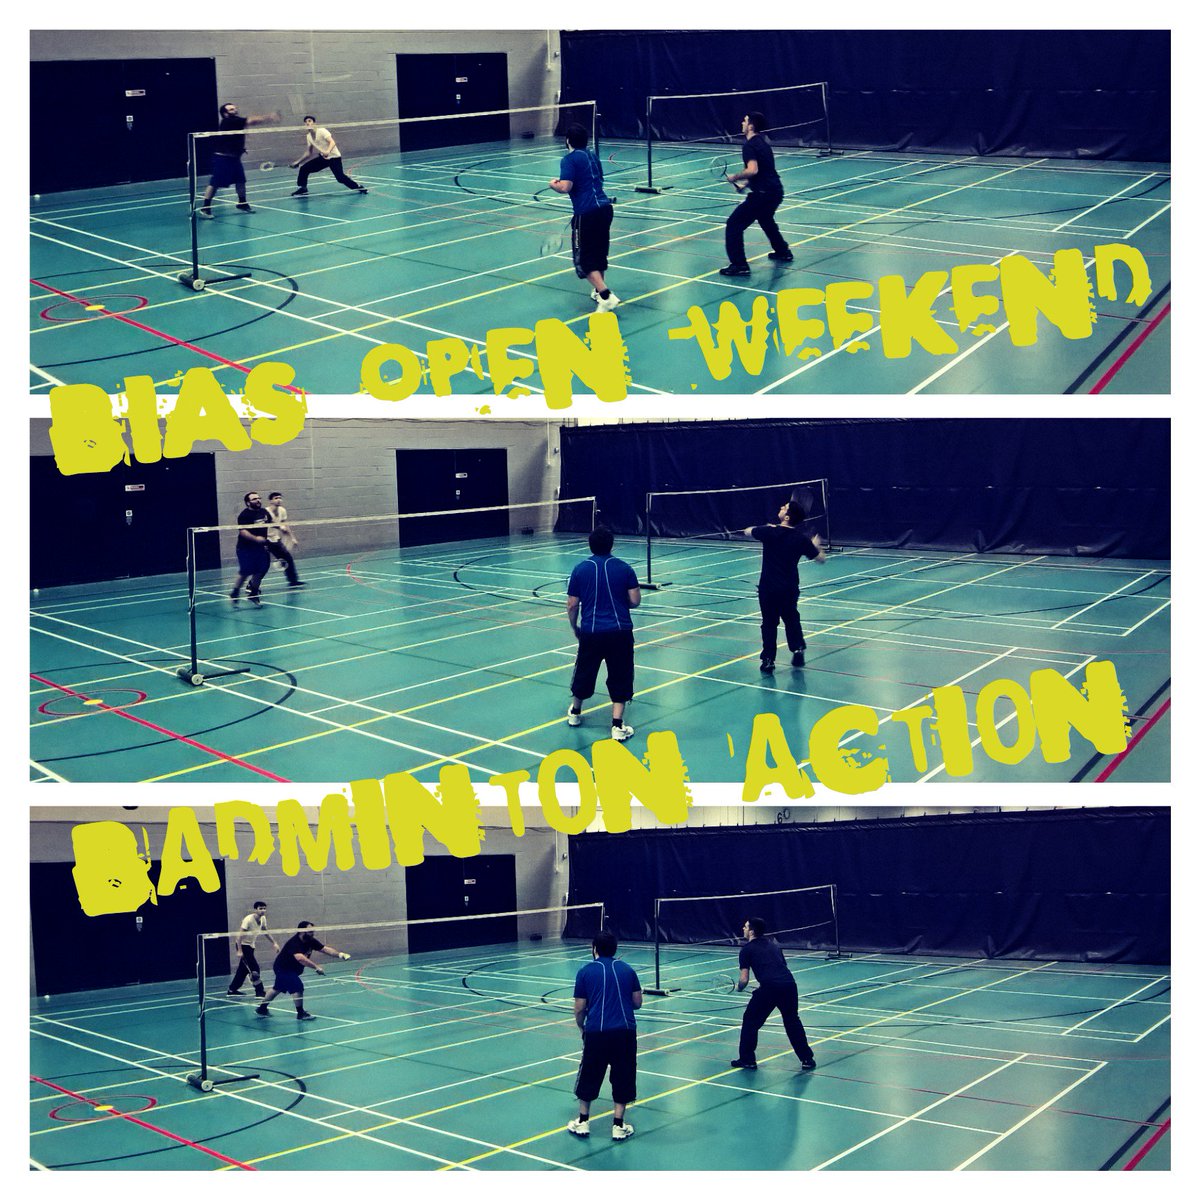 Come & try badminton 🏸 today from 12.30 as part of @Fusion_LS open weekend @BedfordStadium #findyourfusion #makeyourmove #openweekend